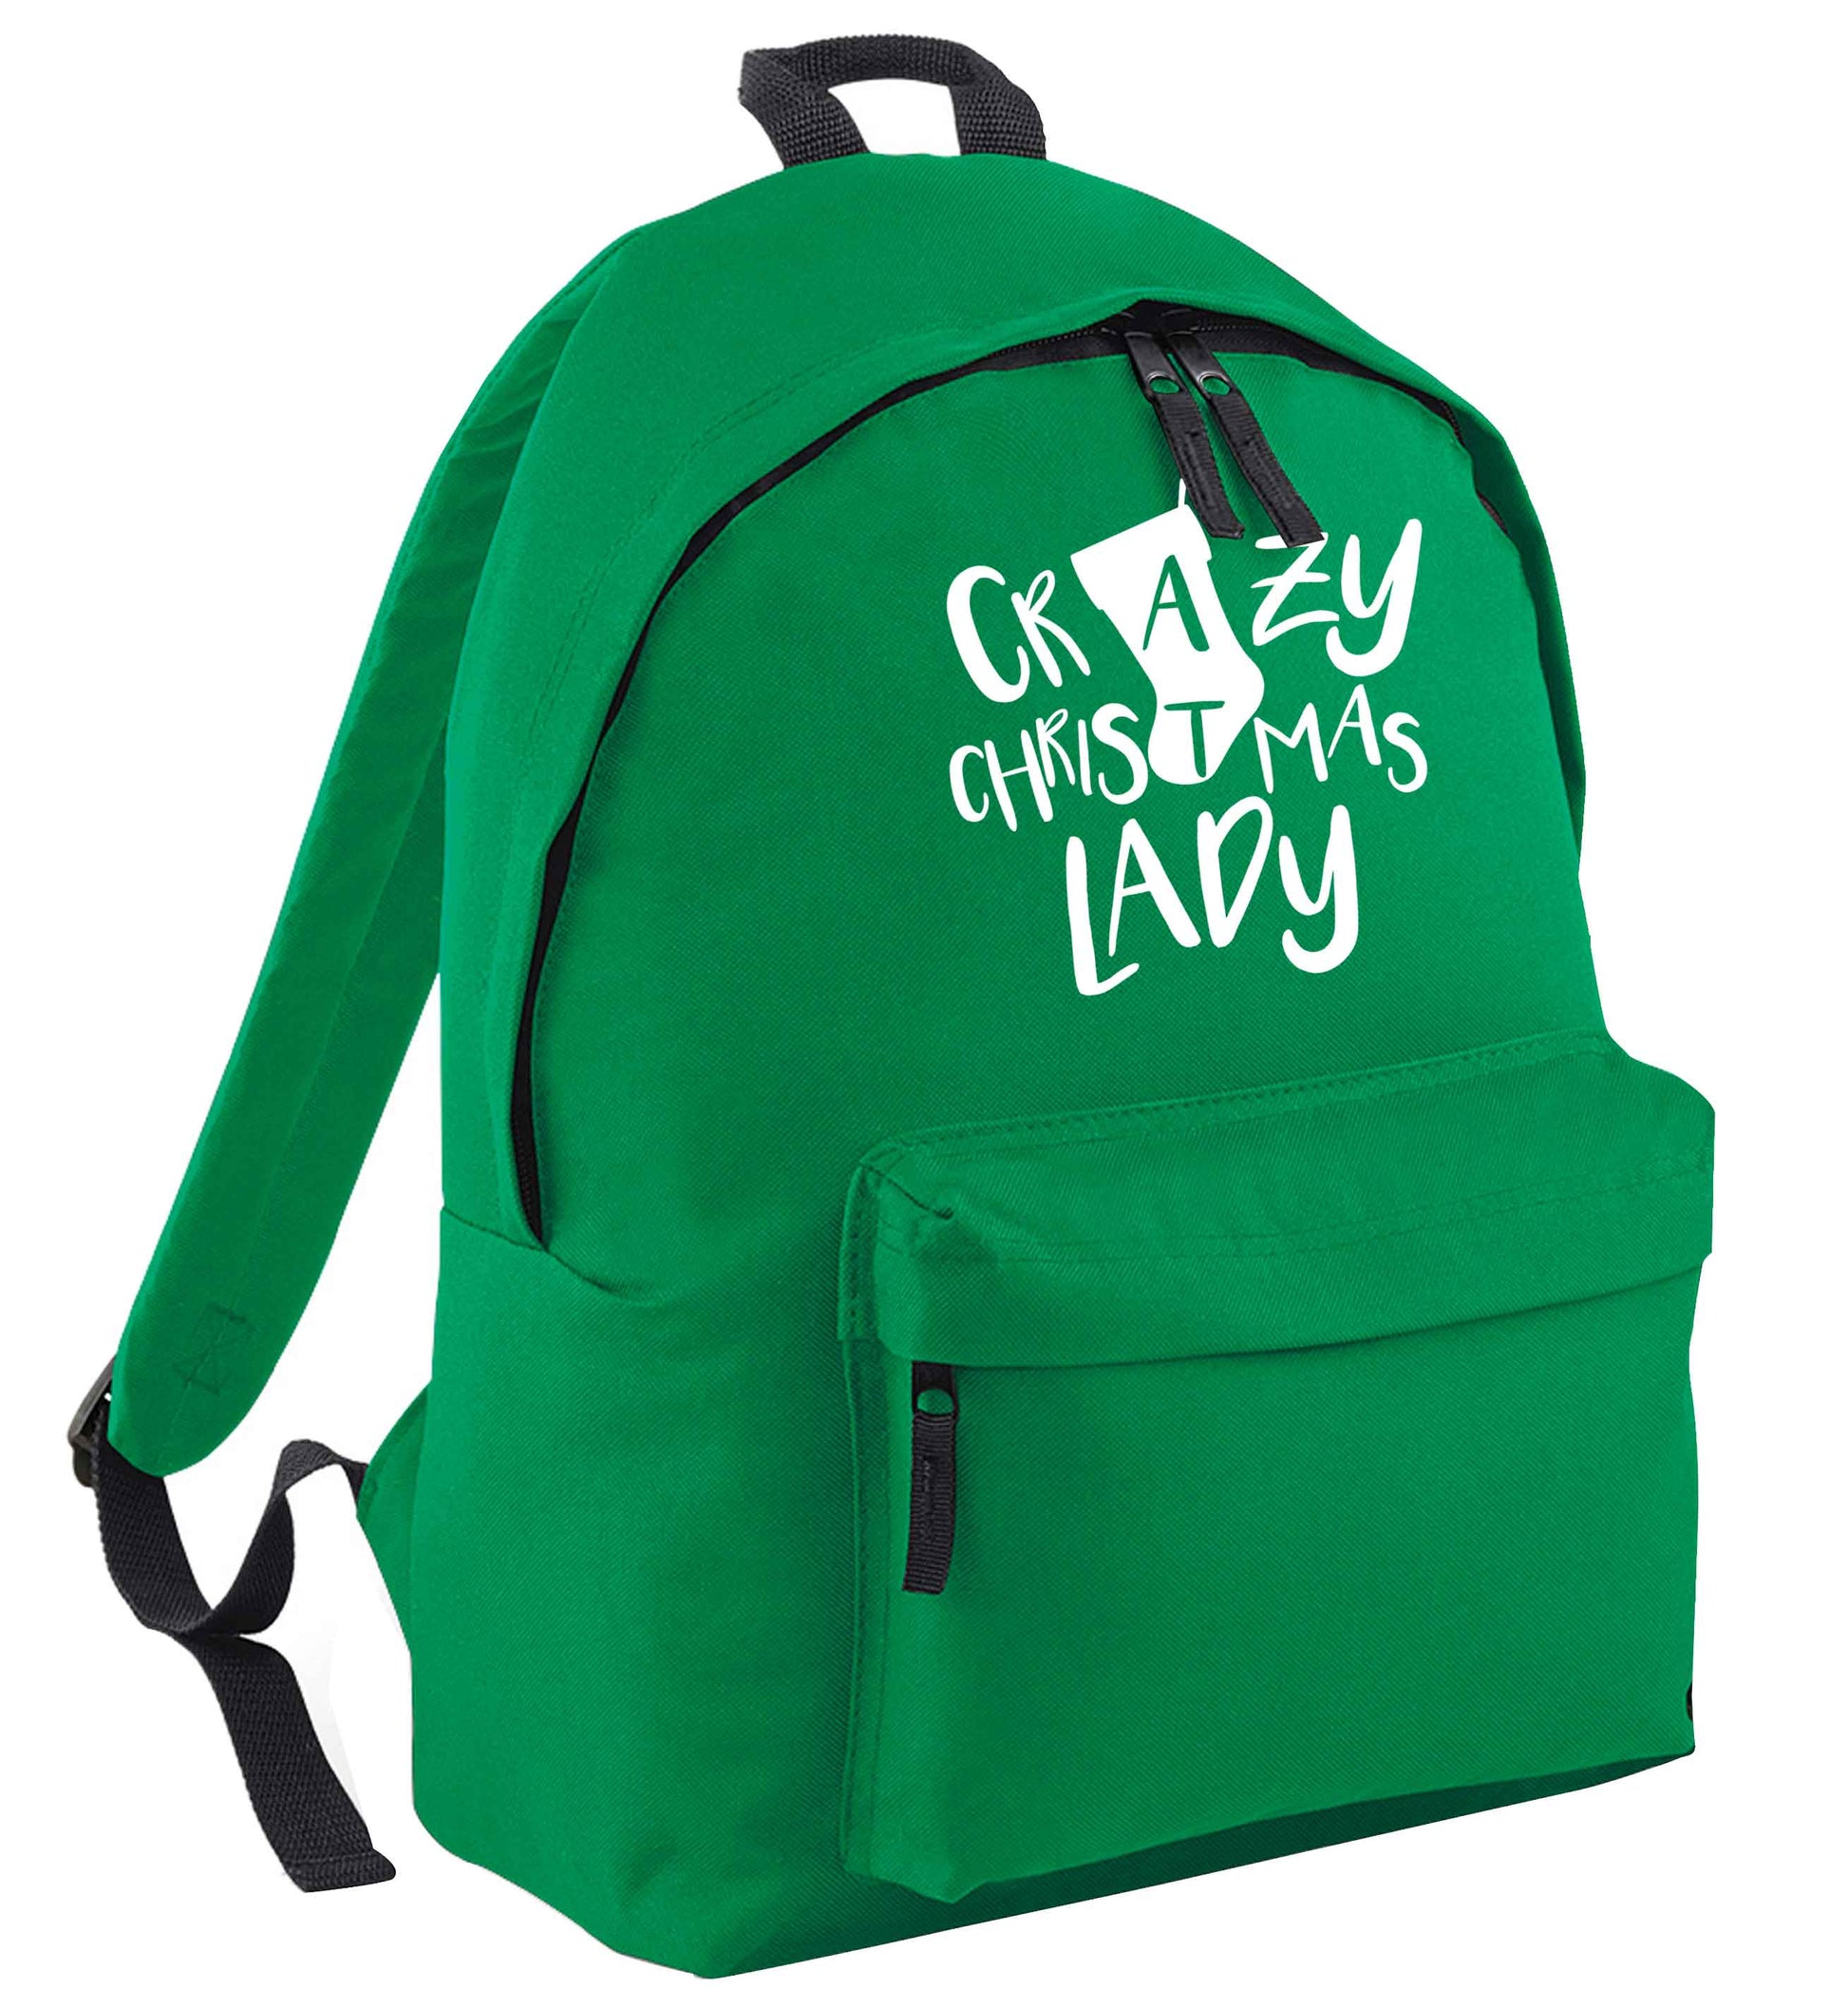 Crazy Christmas Dude green adults backpack